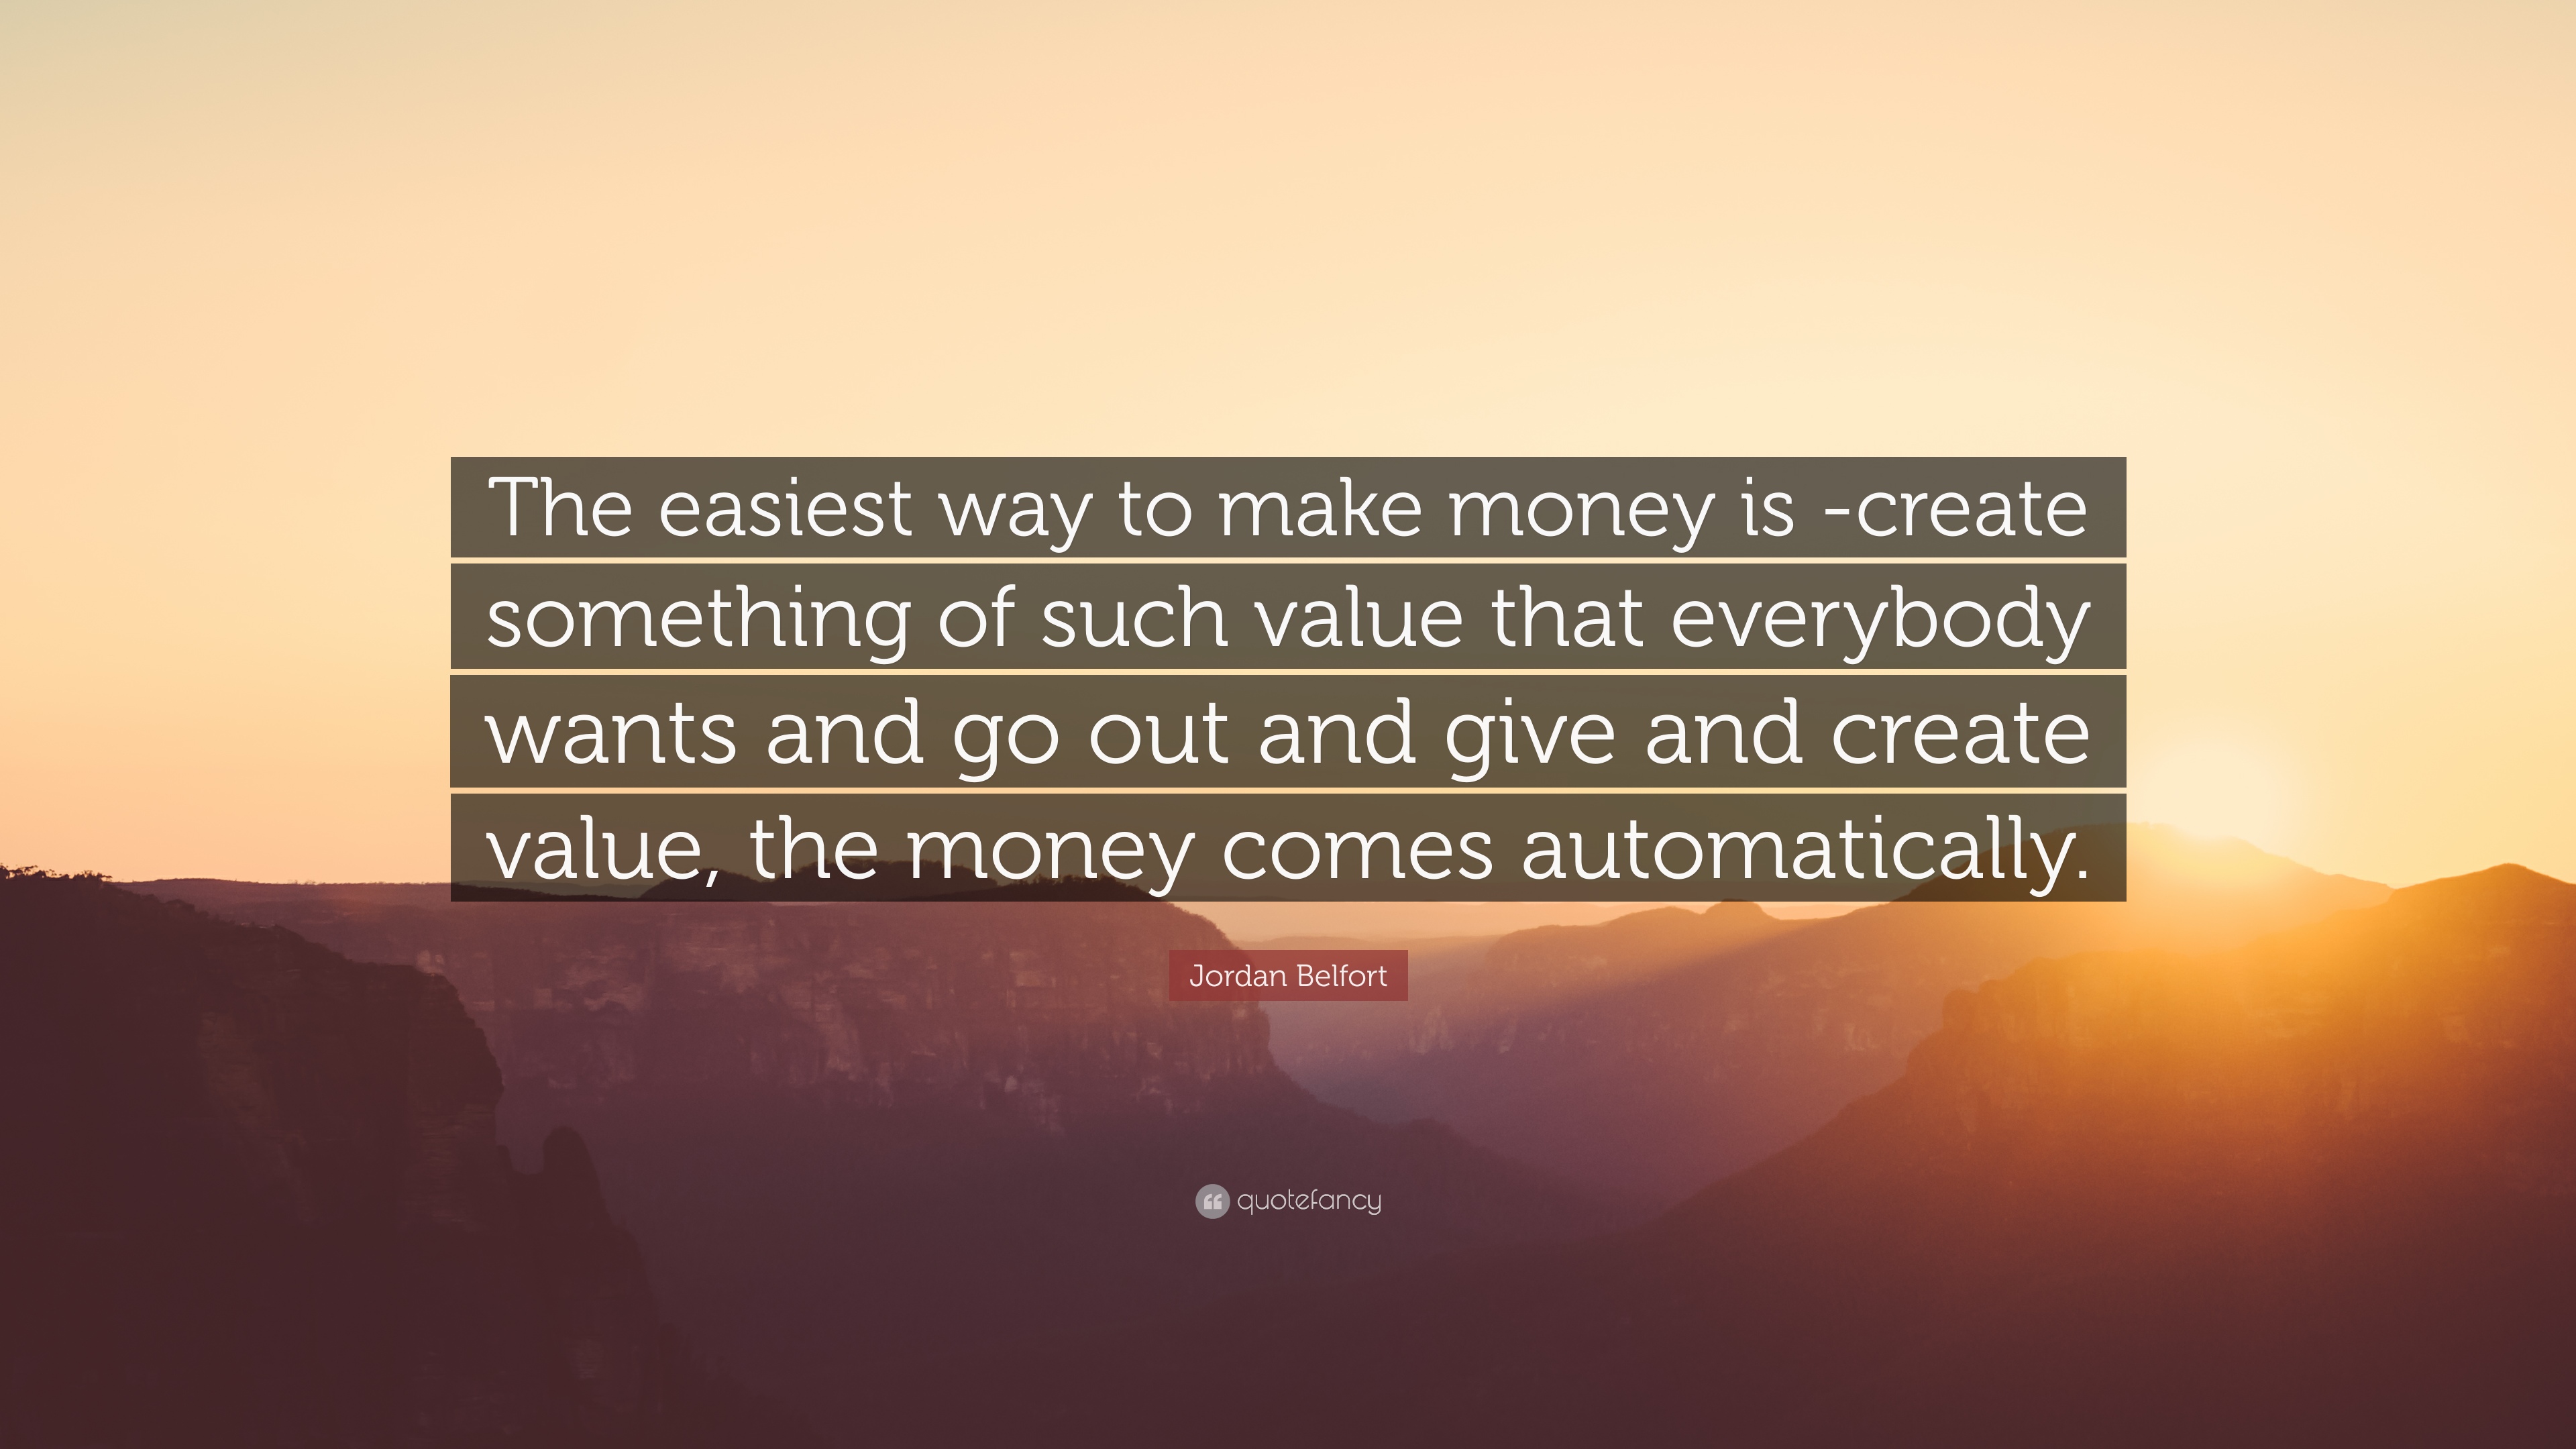 Jordan Belfort Quote: “The easiest way to make money is -create something of such value that everybody wants and go out and give and create val.”